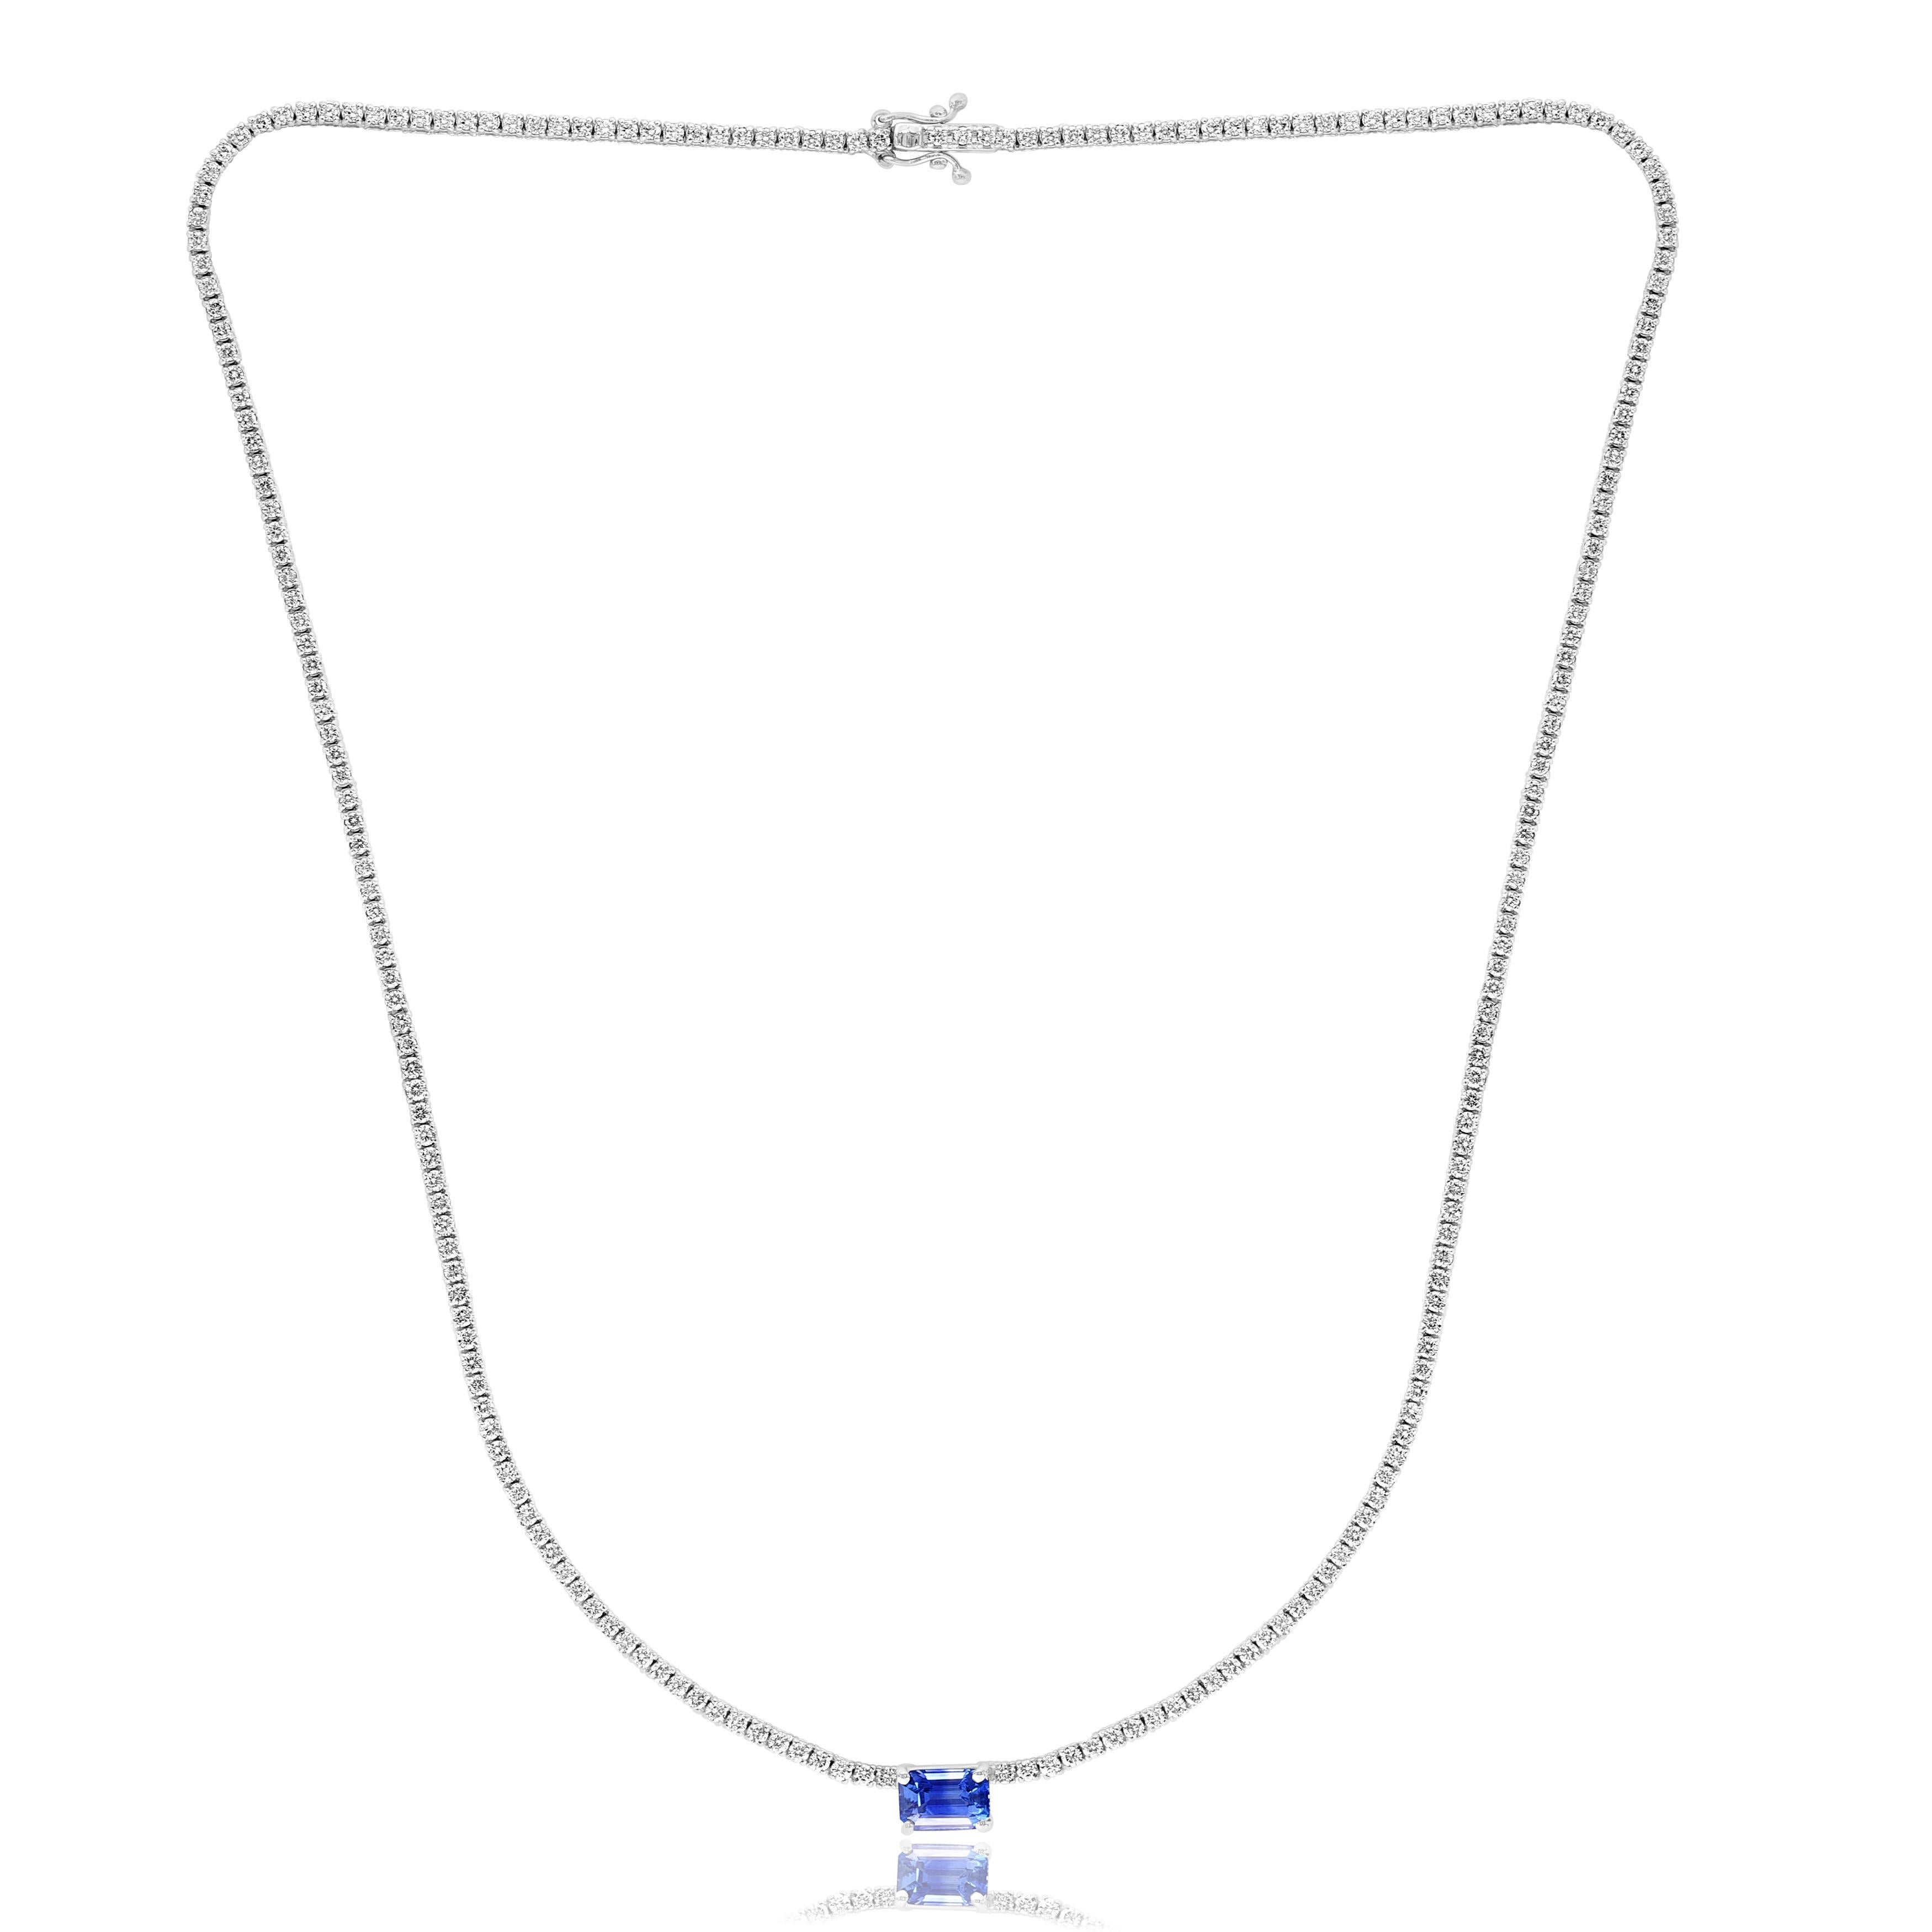 A brilliant and classic piece showcasing emerald-cut Blue Sapphire in the center weighing 1.49 carats and a line of round diamonds on both sides set in 14K White Gold. 216 diamonds in this necklace are brilliant round cut and weigh 3.01 carats in